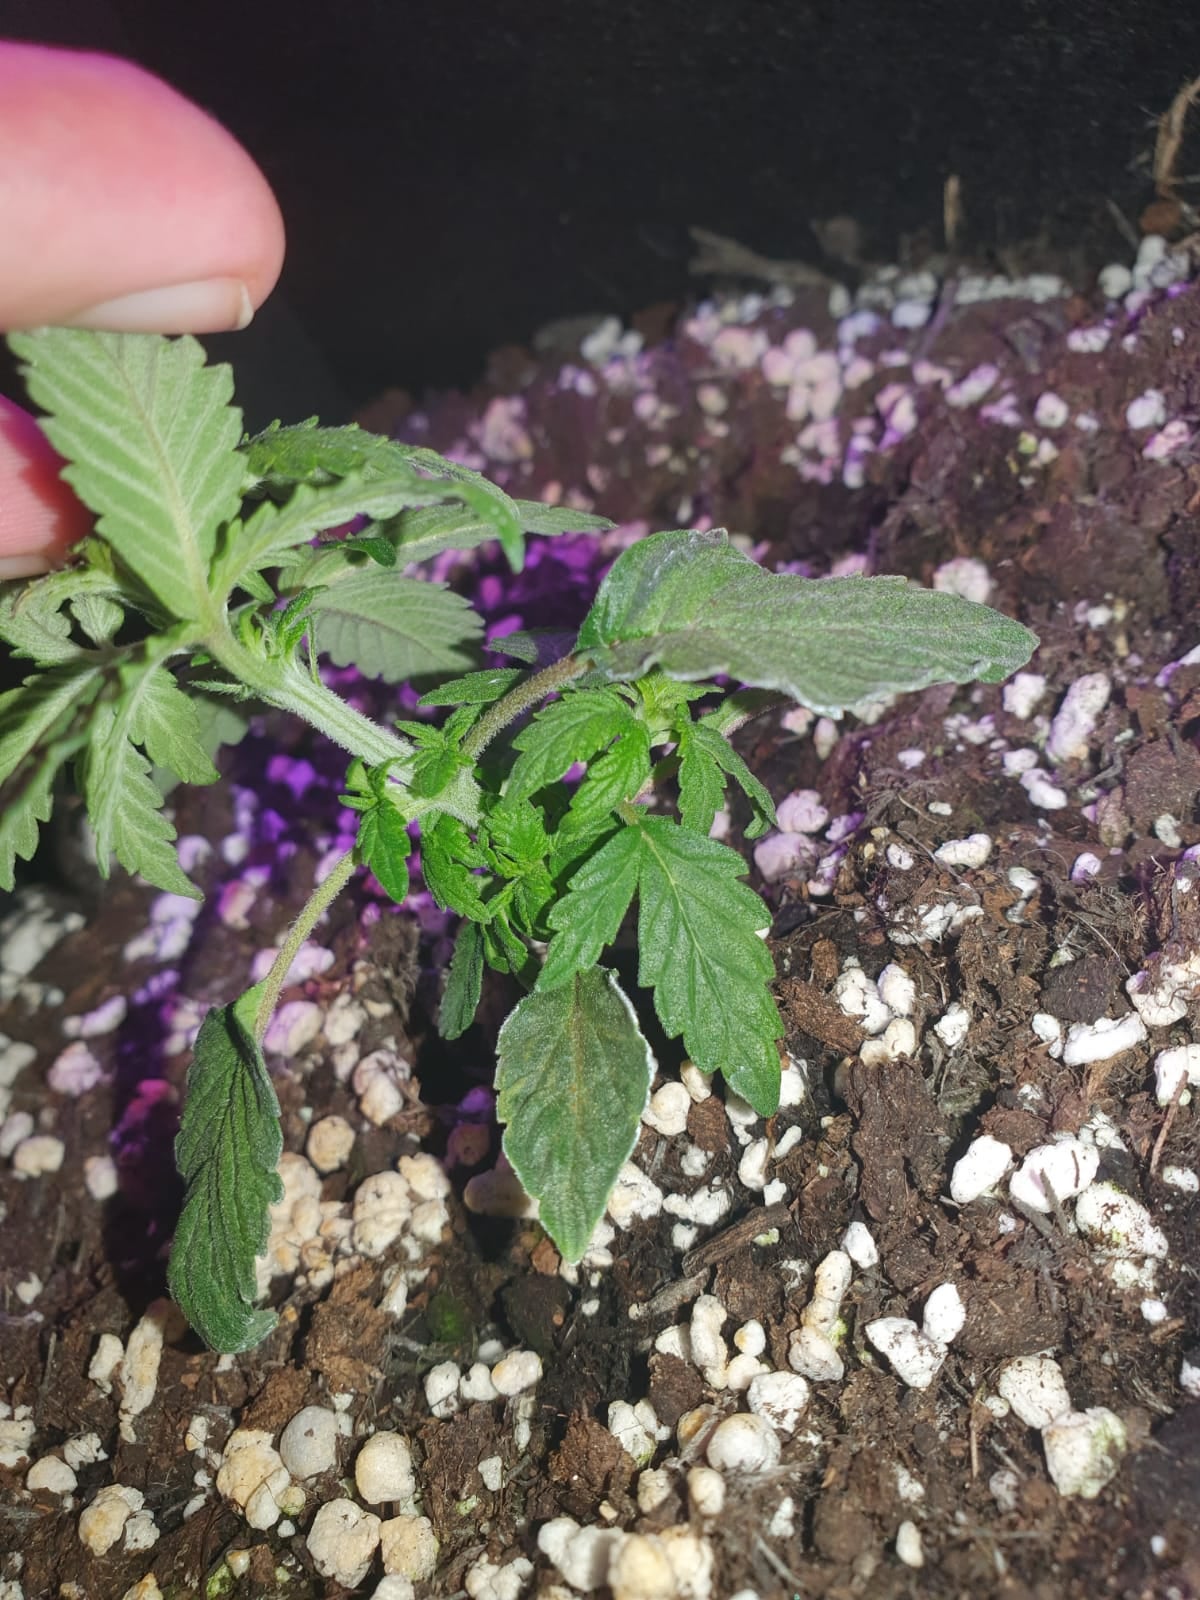 r/SpaceBuckets - What could be wrong with my plants?